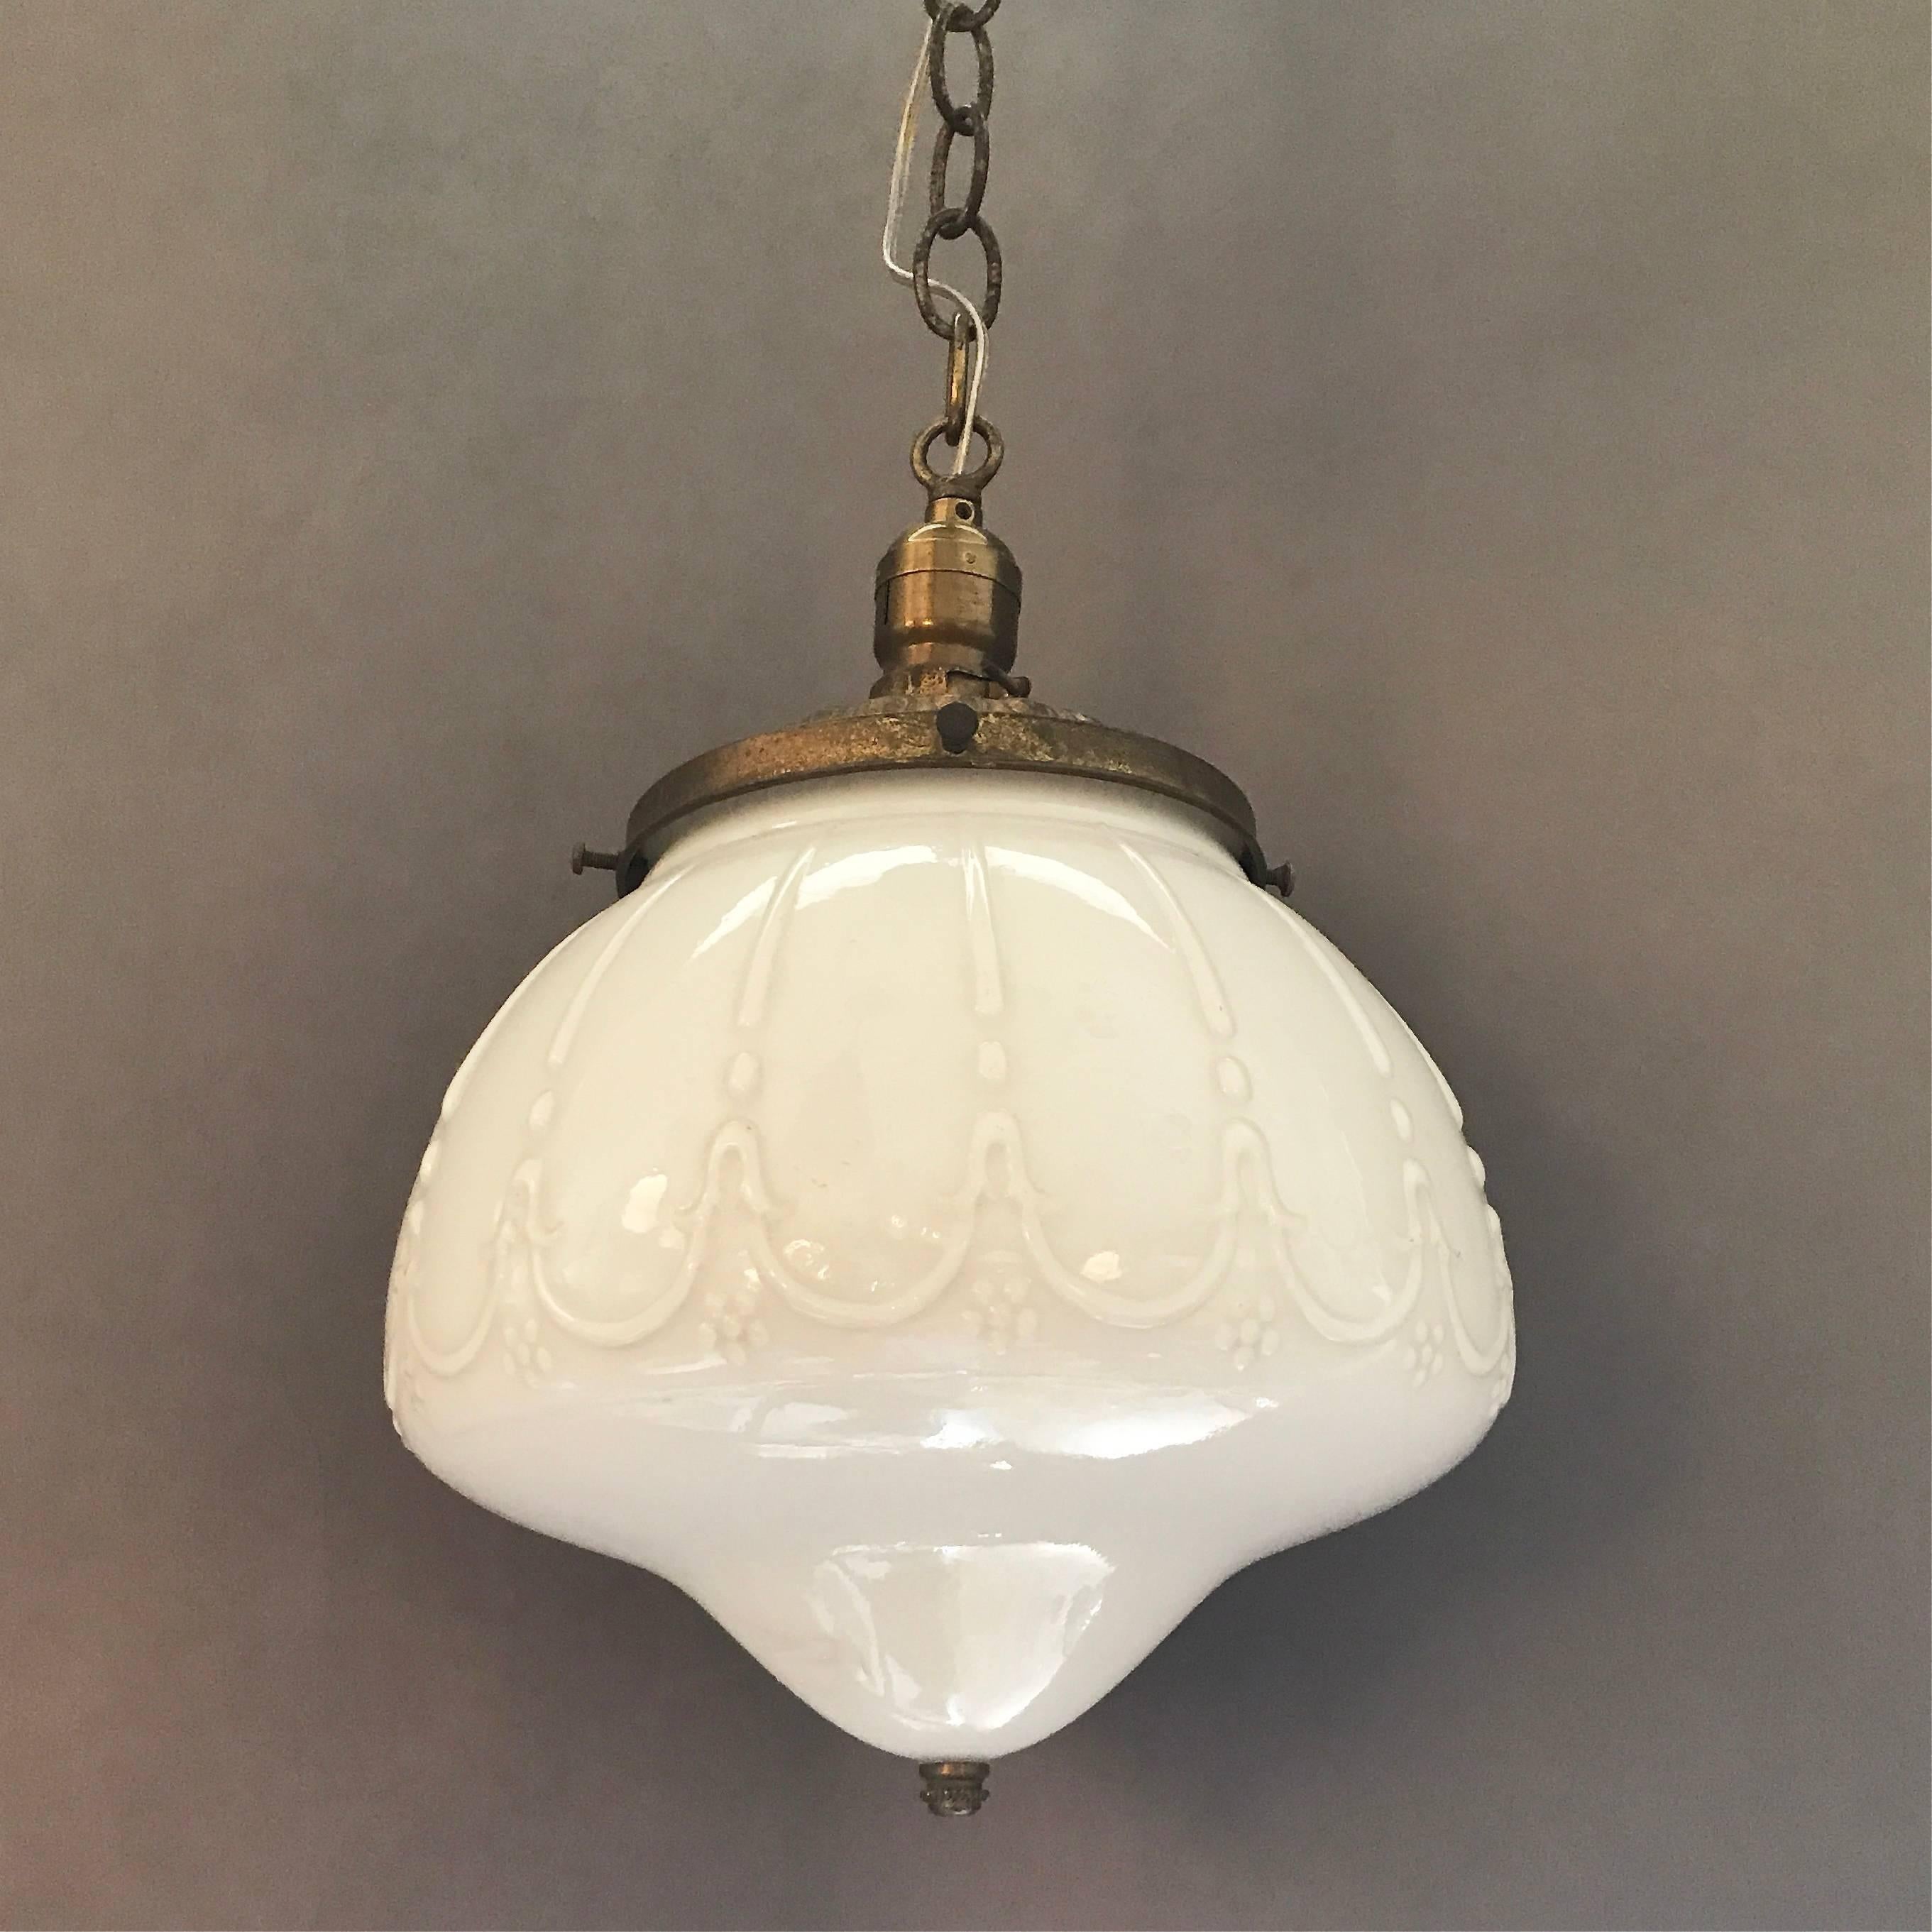 Early 20th century, decorative, milk glass, library pendant with brass fitter, chain and canopy. Newly wired for 200 watts.

Over height: 42in. ht.